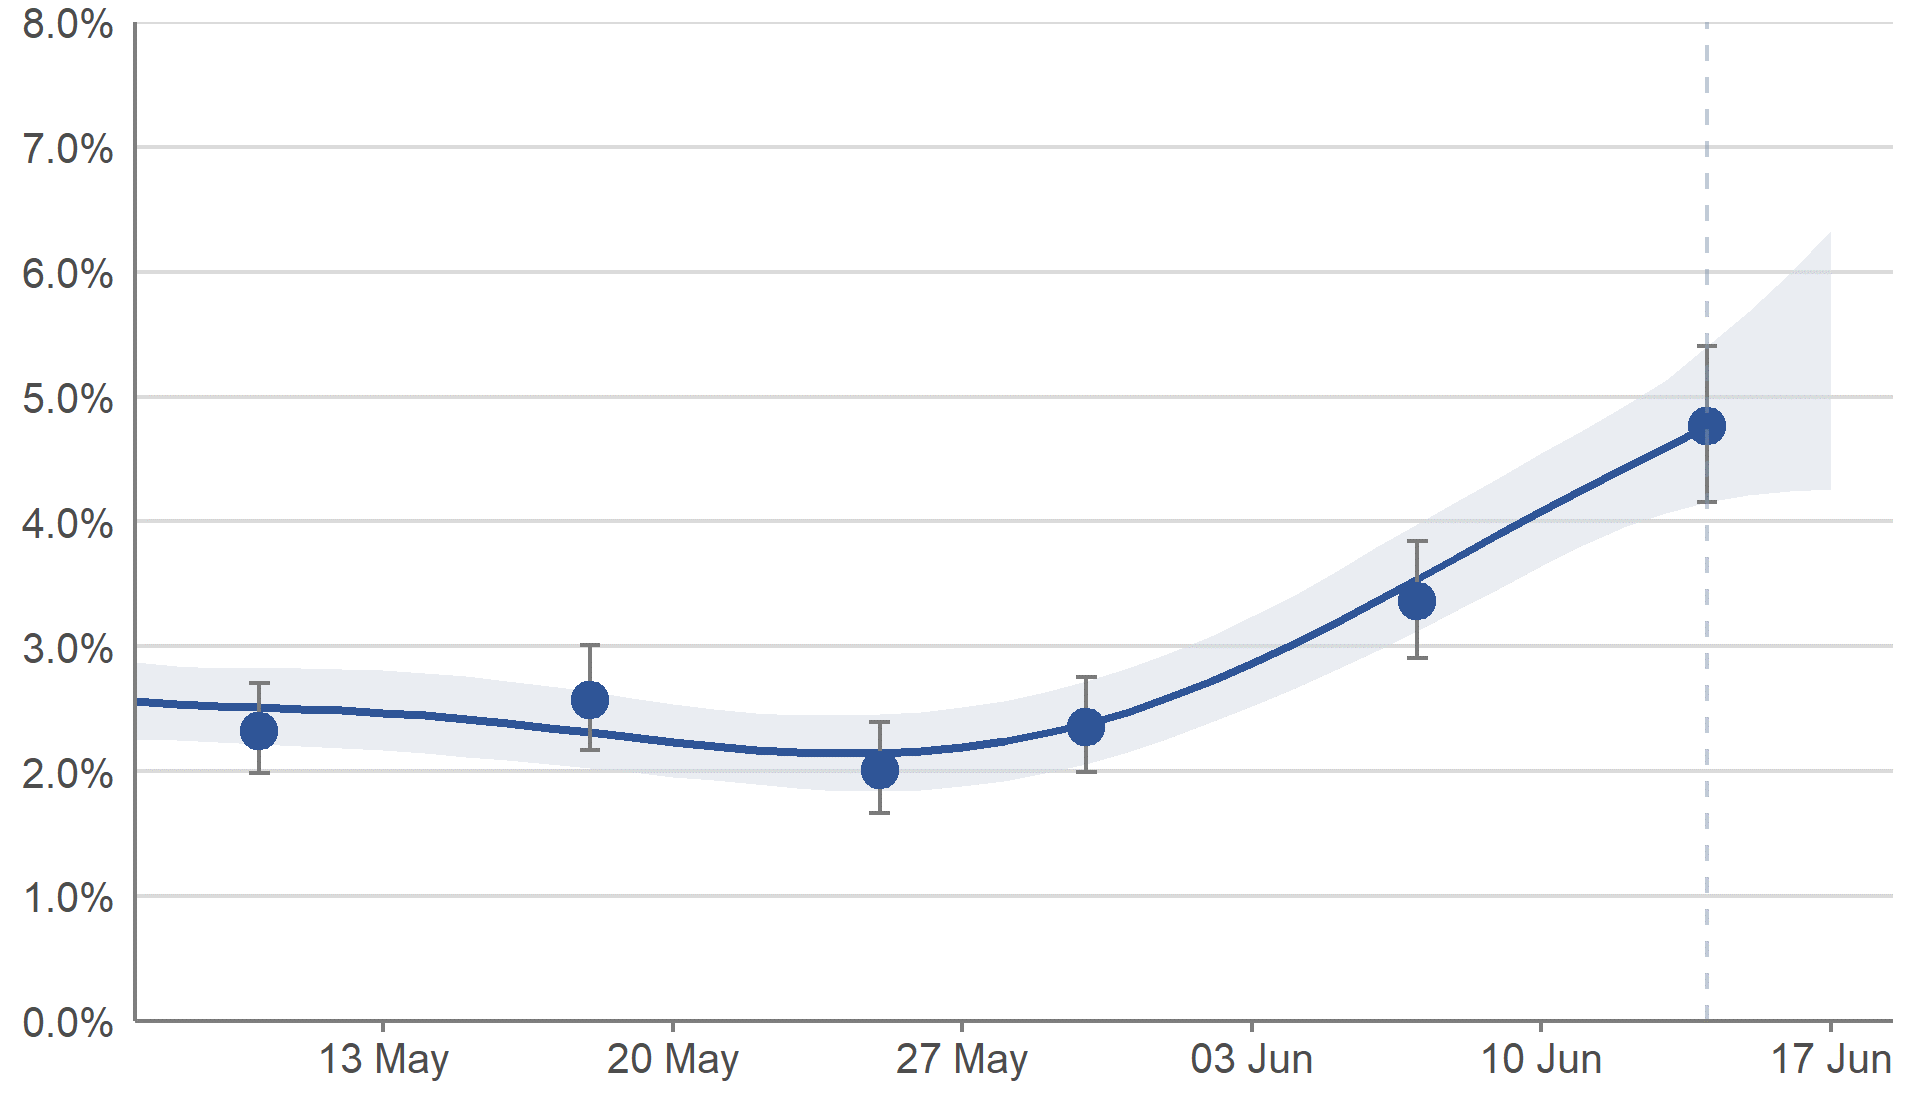 Figure 1: Modelled daily estimates and official reported estimates of the percentage of the population in Scotland testing positive for COVID-19 between 7 May to 17 June 2022, including 95% credible intervals  A chart showing estimates of the percentage of the population in Scotland testing positive for COVID-19 between 7 May and 17 June 2022. Modelled daily estimates are represented by a blue line with 95% credible intervals in pale blue shading, and official reported weekly estimates are represented by blue dots with whiskers showing the 95% credible intervals. A vertical dashed line near the end of the series indicates greater uncertainty in estimates for the last three reported days. The estimated percentage of people testing positive for COVID-19 increased in the most recent week.